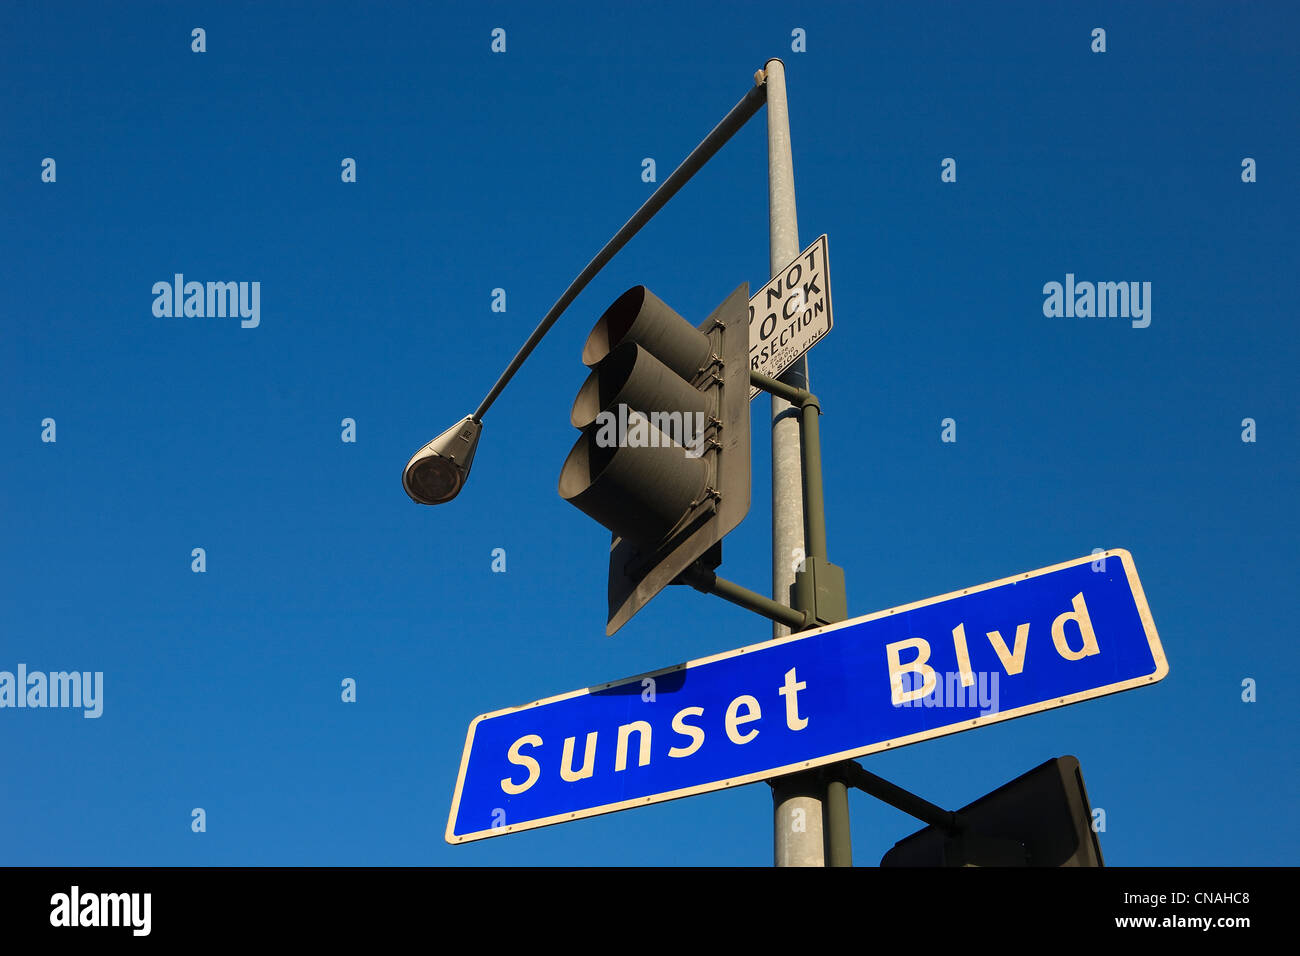 United States, California, Los Angeles, Hollywood, sur Sunset Boulevard rue signl Banque D'Images